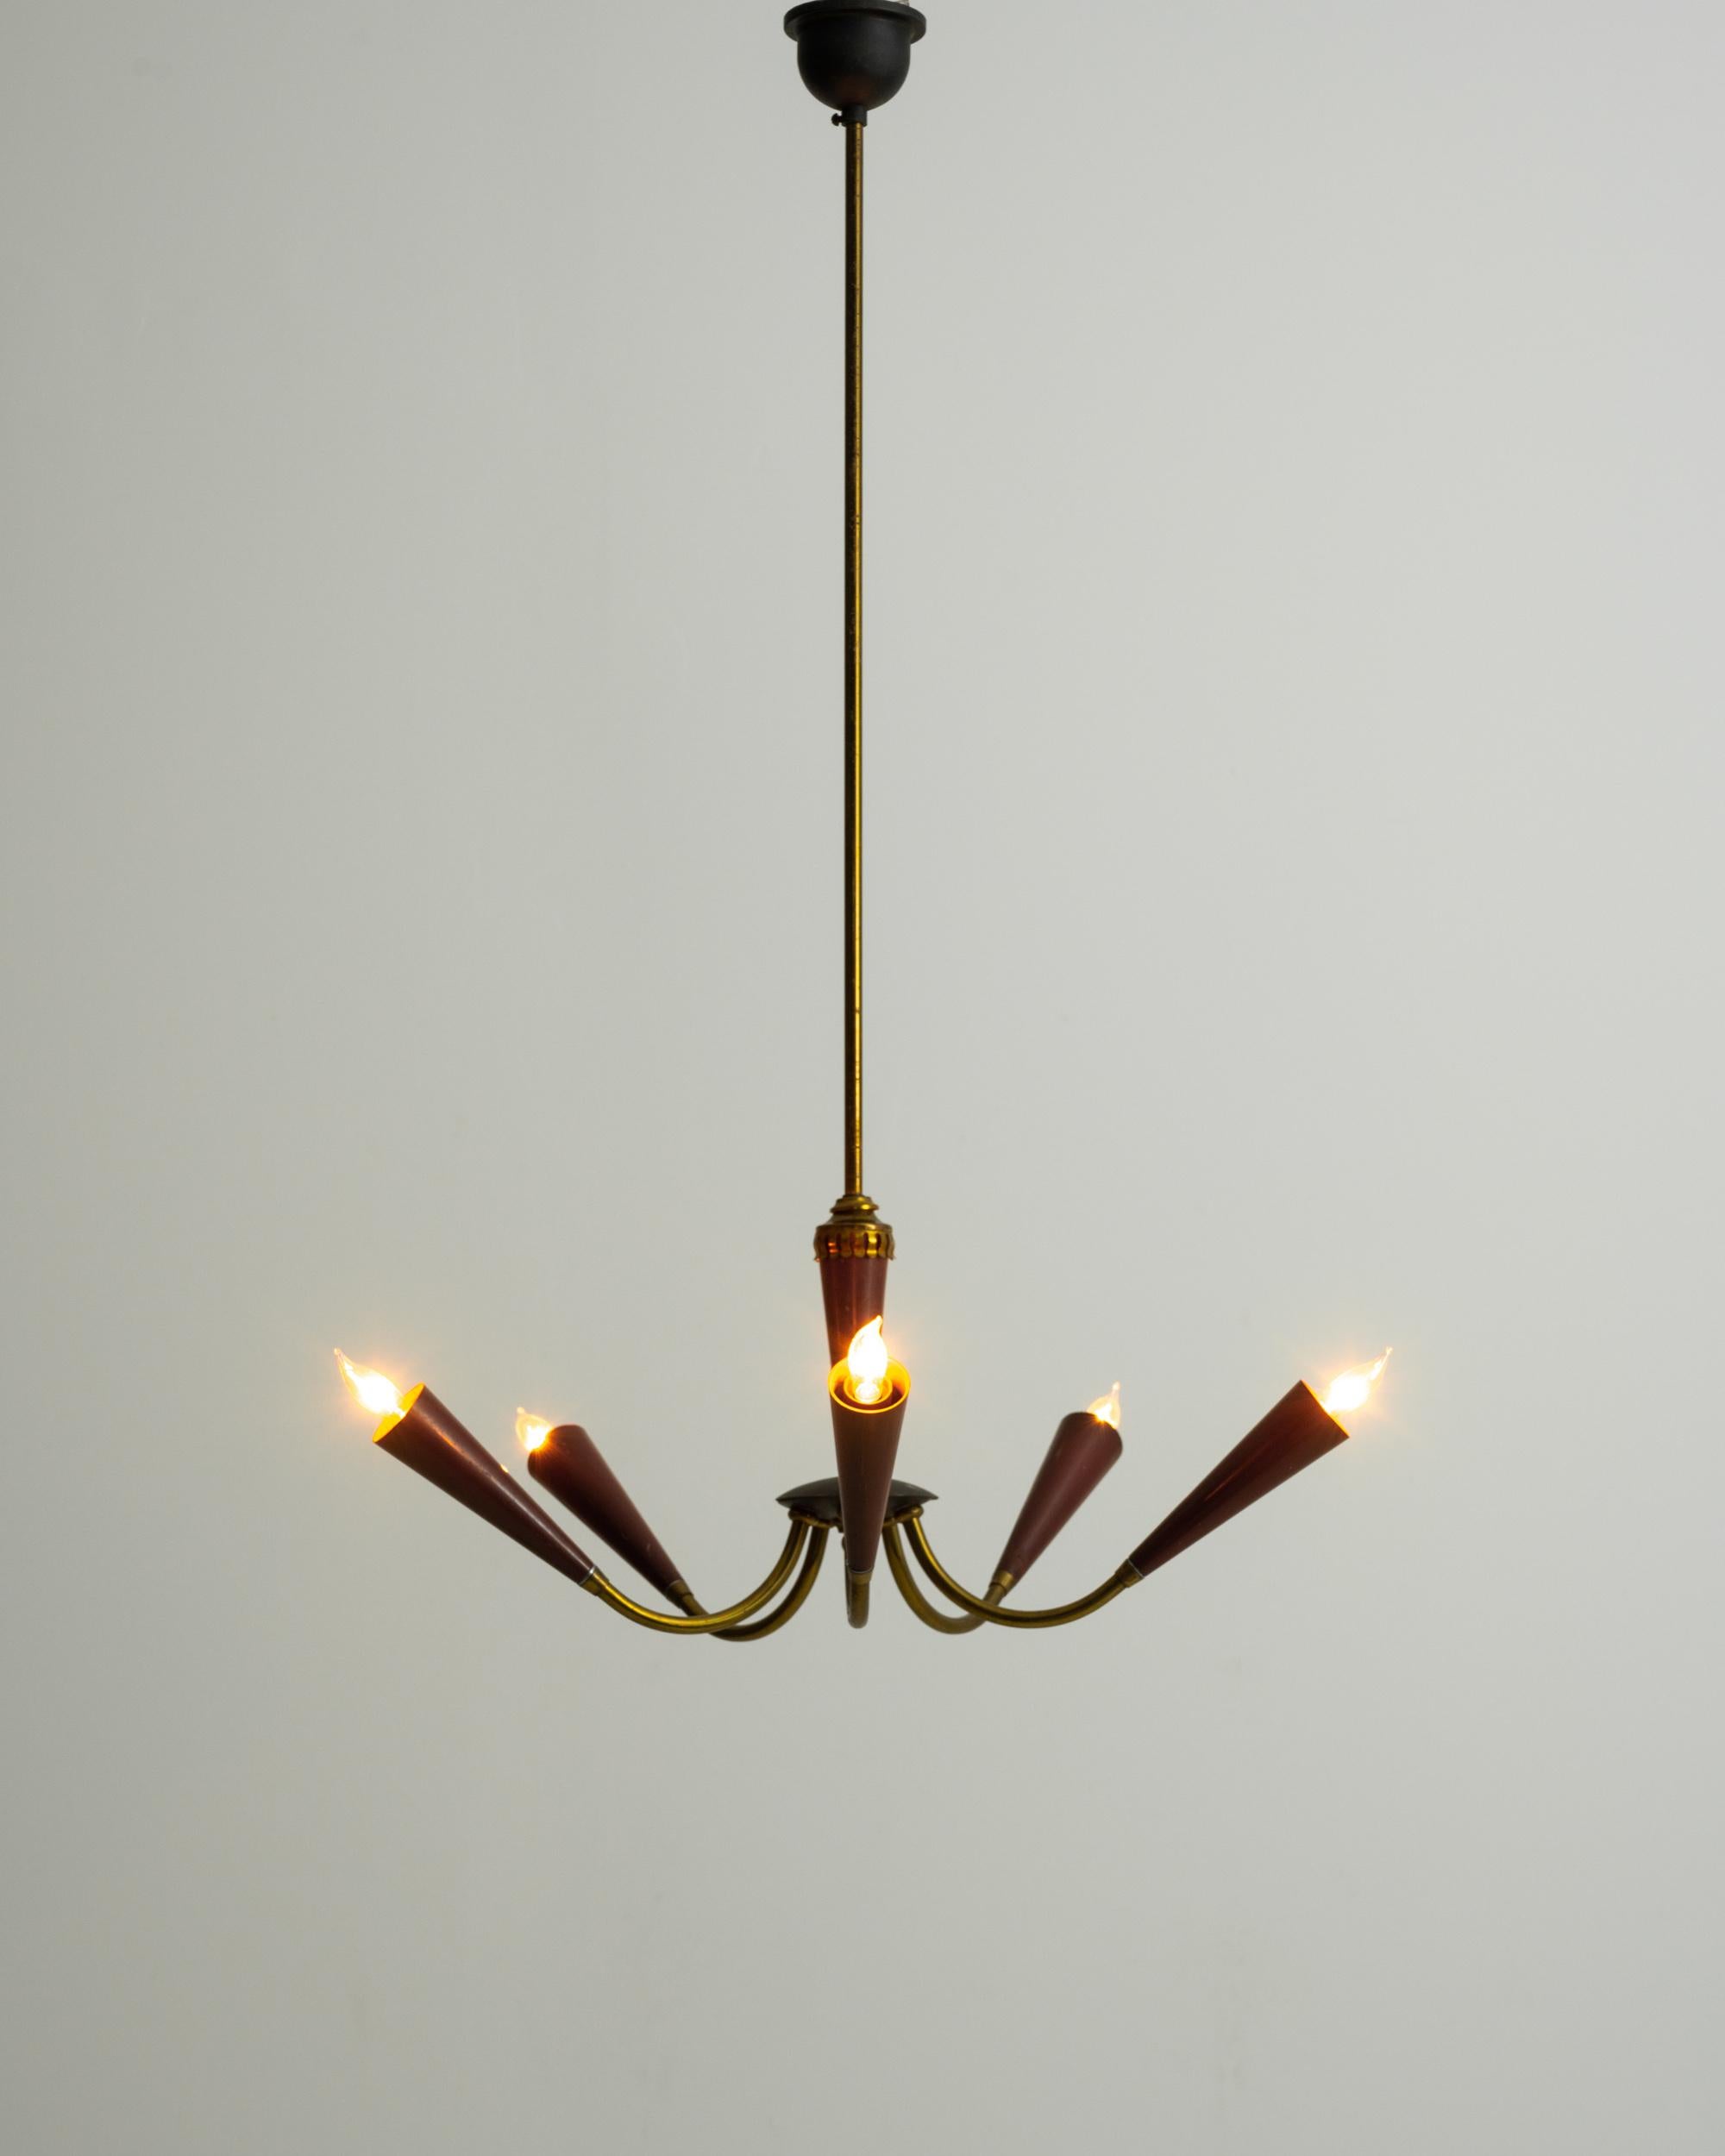 A metal chandelier created in Italy in the 1960s. Five, bulb-tipped arms bloom like brassy tulips from this unique chandelier’s central socket. Emitting a warm glow and a classically stylish charm, this fixture brings a charismatic life to the room.